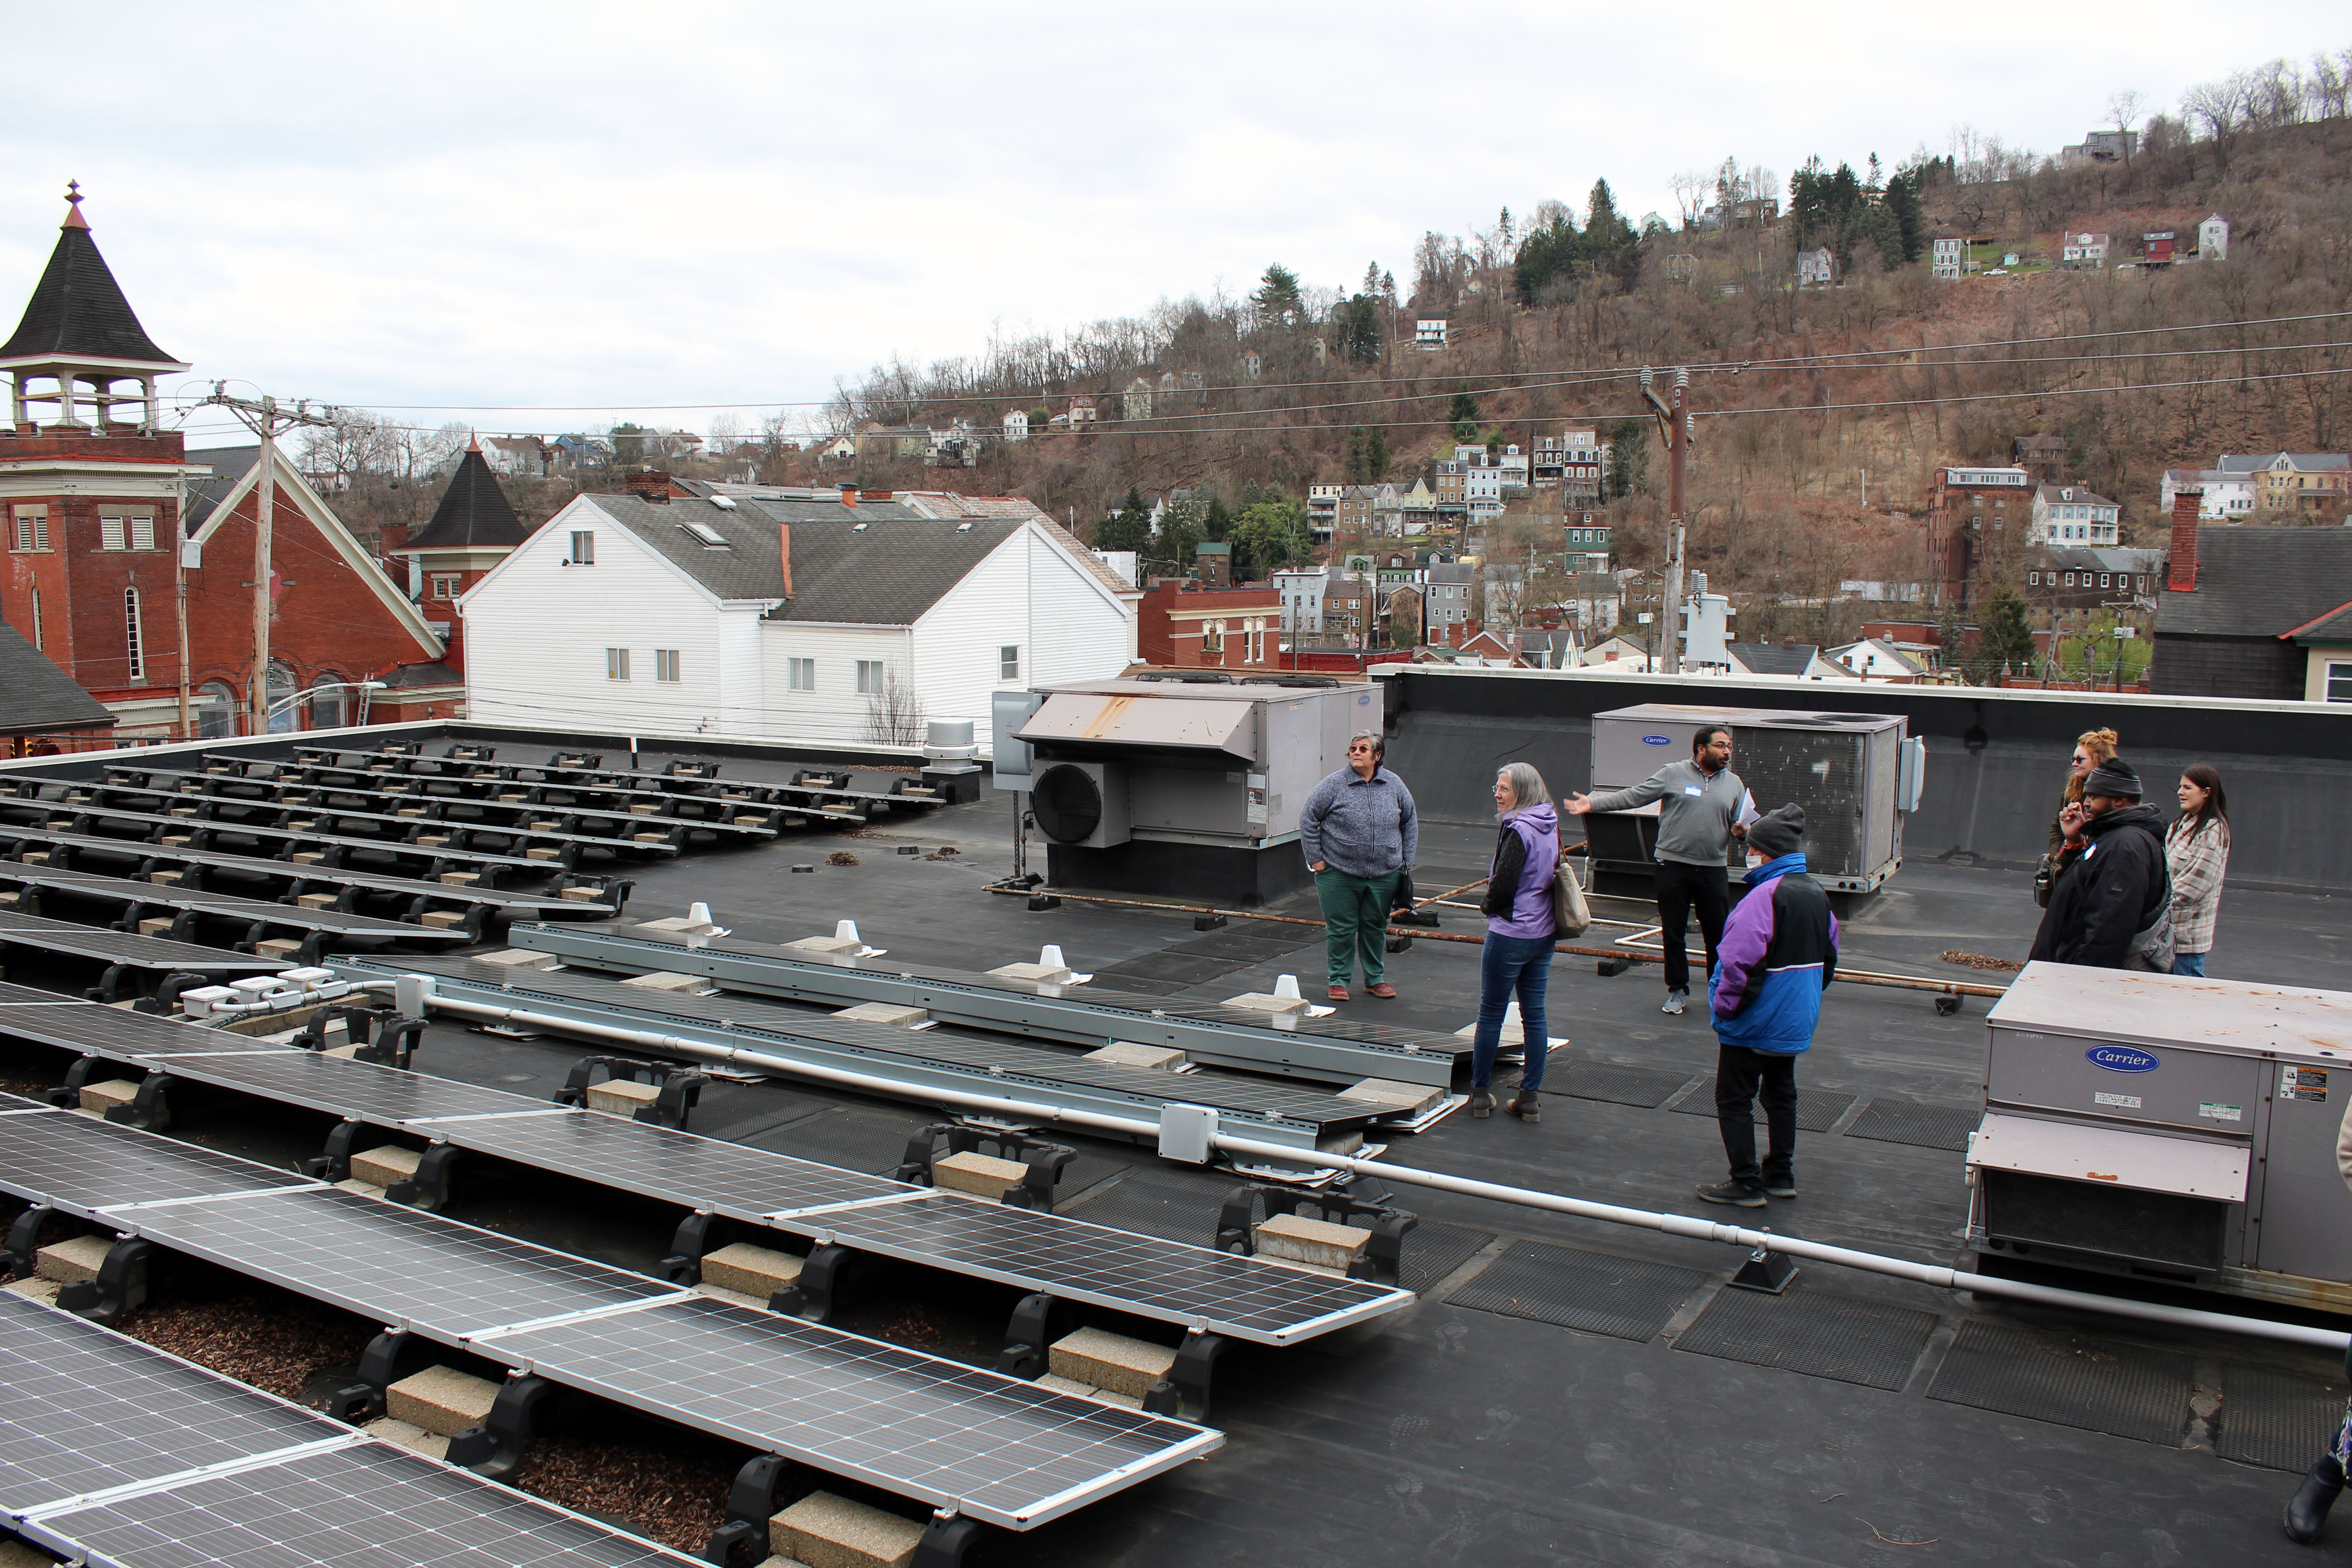 People stand on a roof with solar panels